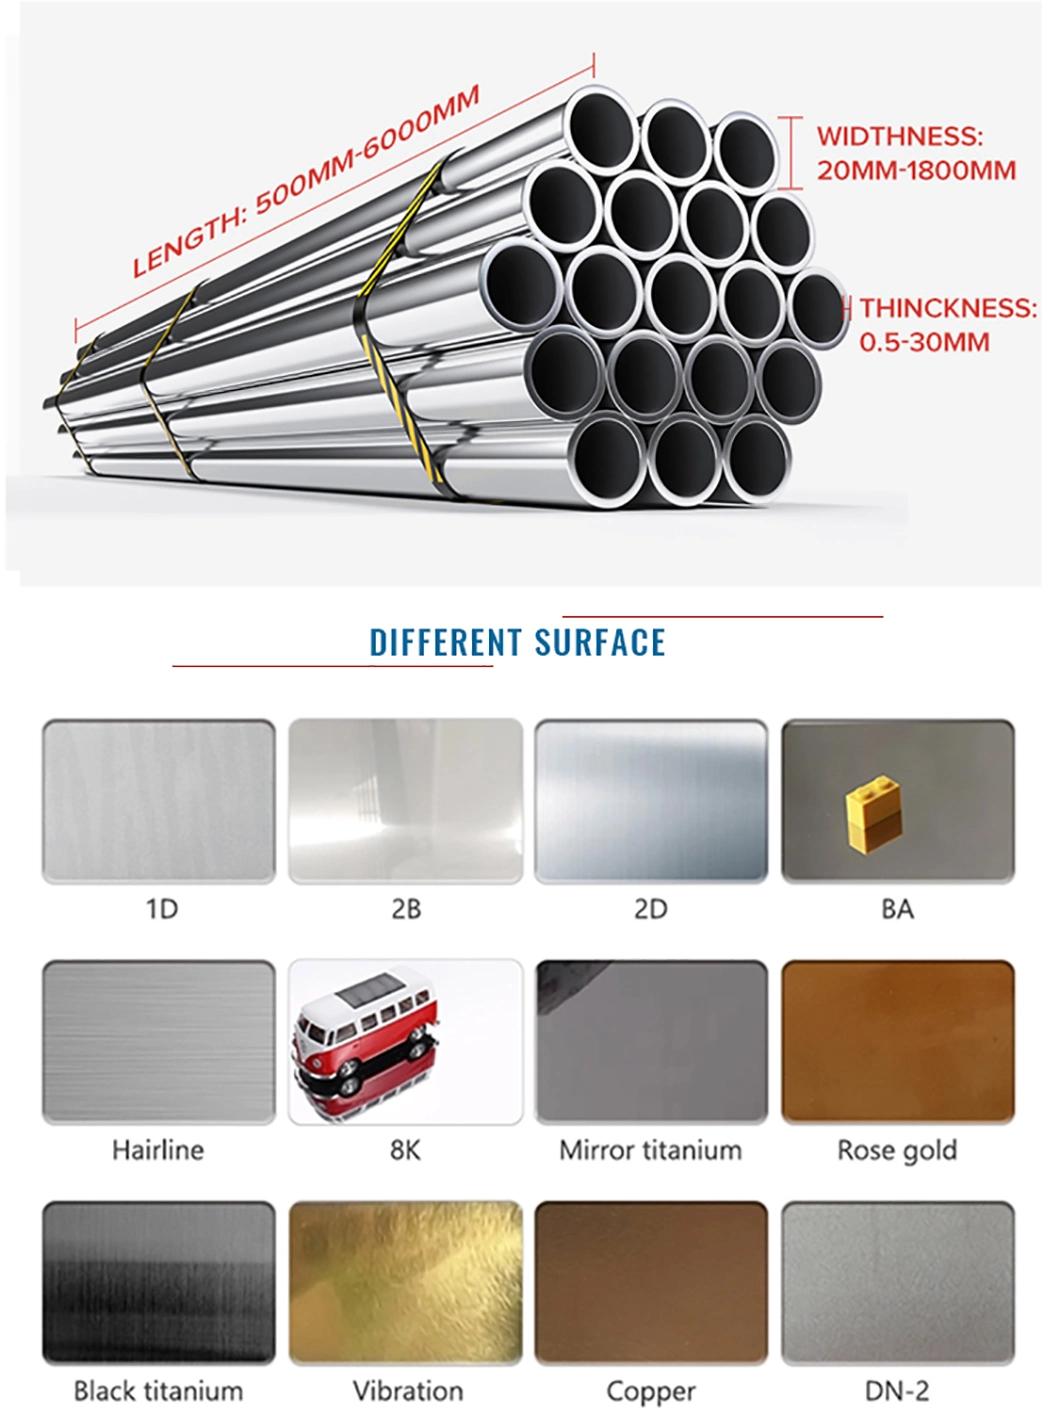 Professional Exporters ASTM A312 TP304 Tp316L Round Seamless Tube Stainless Steel Seamless Pipes